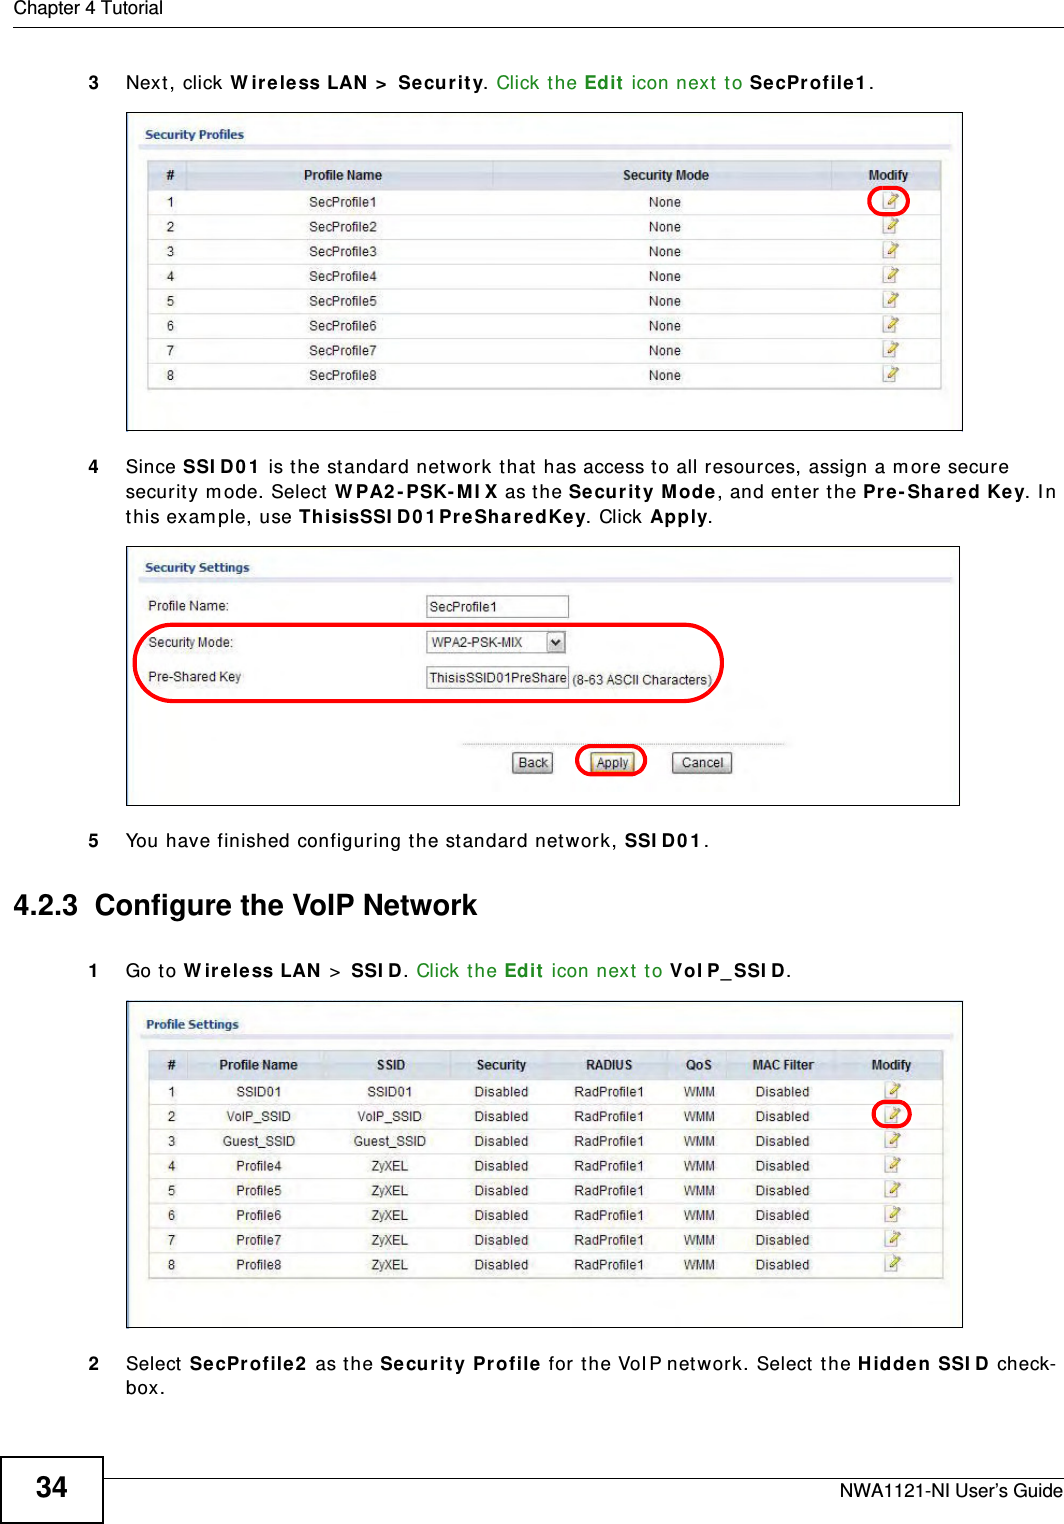 Chapter 4 TutorialNWA1121-NI User’s Guide343Next, click Wireless LAN &gt; Security. Click the Edit icon next to SecProfile1. 4Since SSID01 is the standard network that has access to all resources, assign a more secure security mode. Select WPA2-PSK-MIX as the Security Mode, and enter the Pre-Shared Key. In this example, use ThisisSSID01PreSharedKey. Click Apply. 5You have finished configuring the standard network, SSID01. 4.2.3  Configure the VoIP Network1Go to Wireless LAN &gt; SSID. Click the Edit icon next to VoIP_SSID. 2Select SecProfile2 as the Security Profile for the VoIP network. Select the Hidden SSID check-box. 